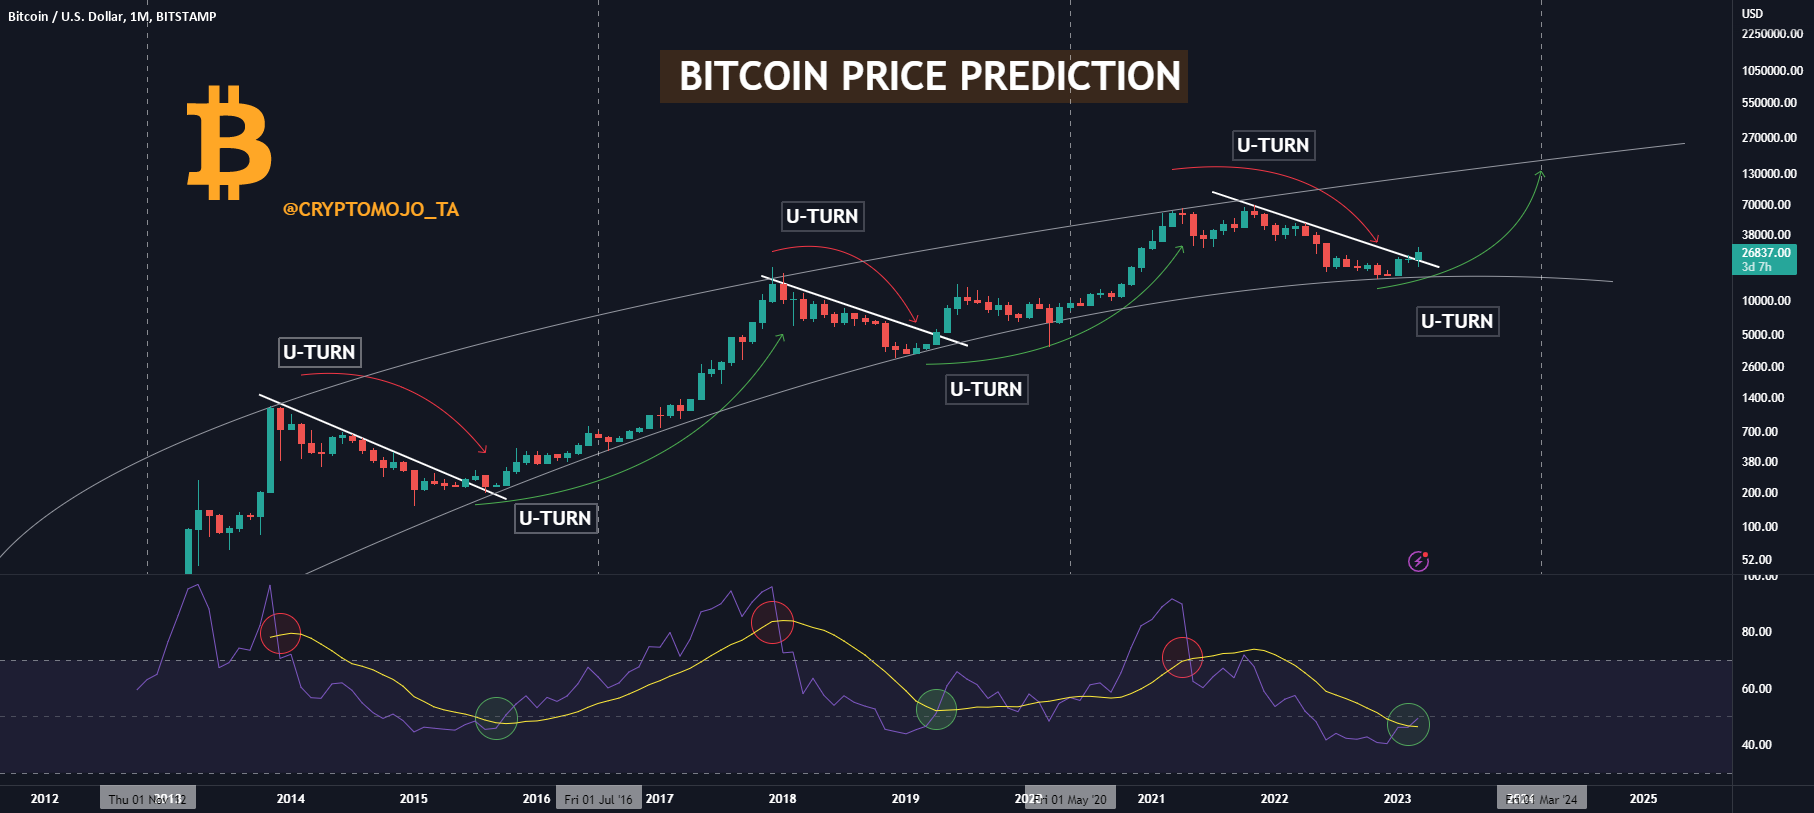 Bitcoin (BTC) Price Prediction 25 May Bitcoin's Bounce Could Be Limited [Video]